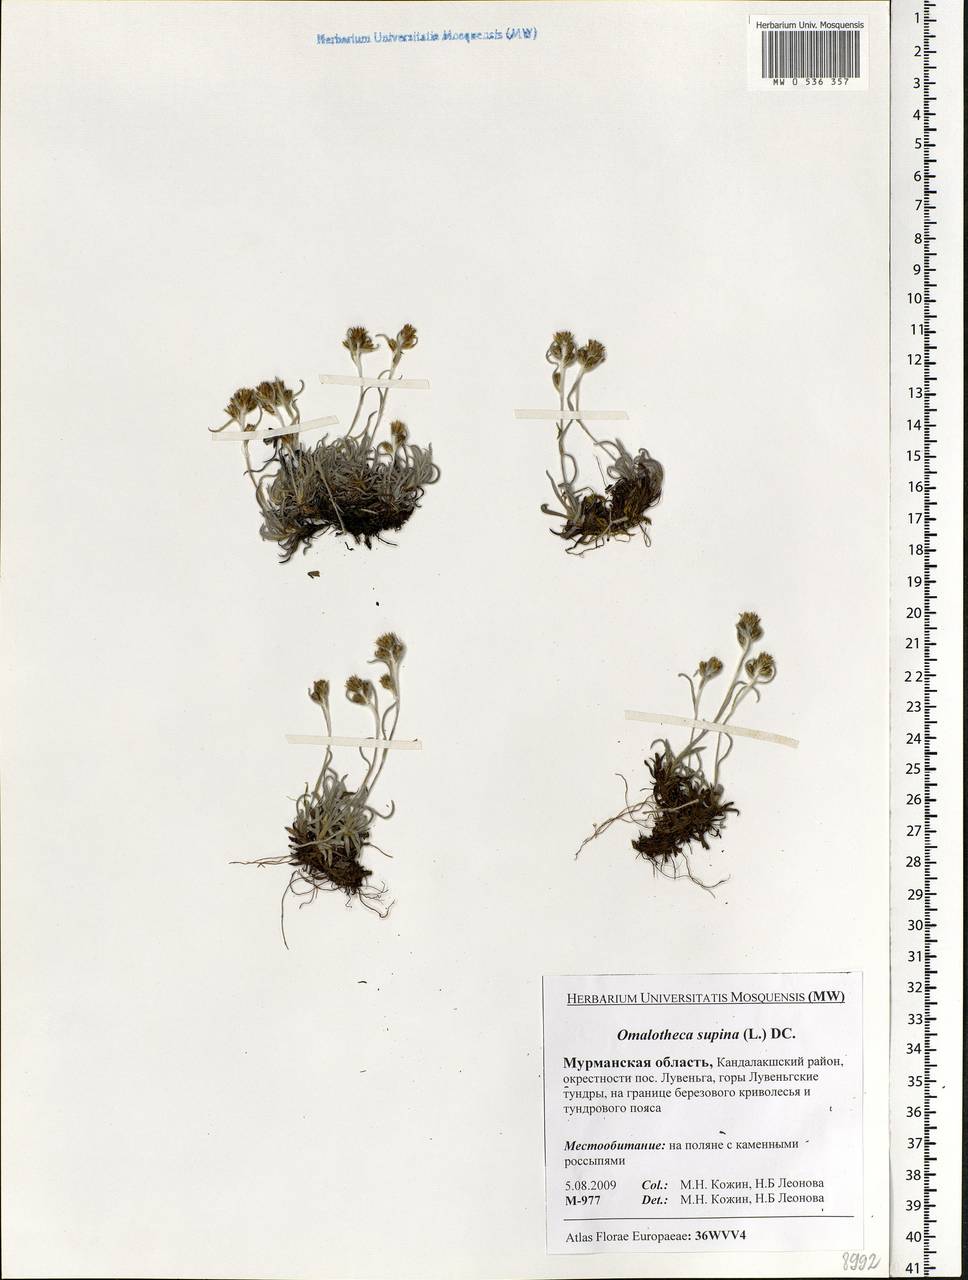 Omalotheca supina (L.) DC., Eastern Europe, Northern region (E1) (Russia)